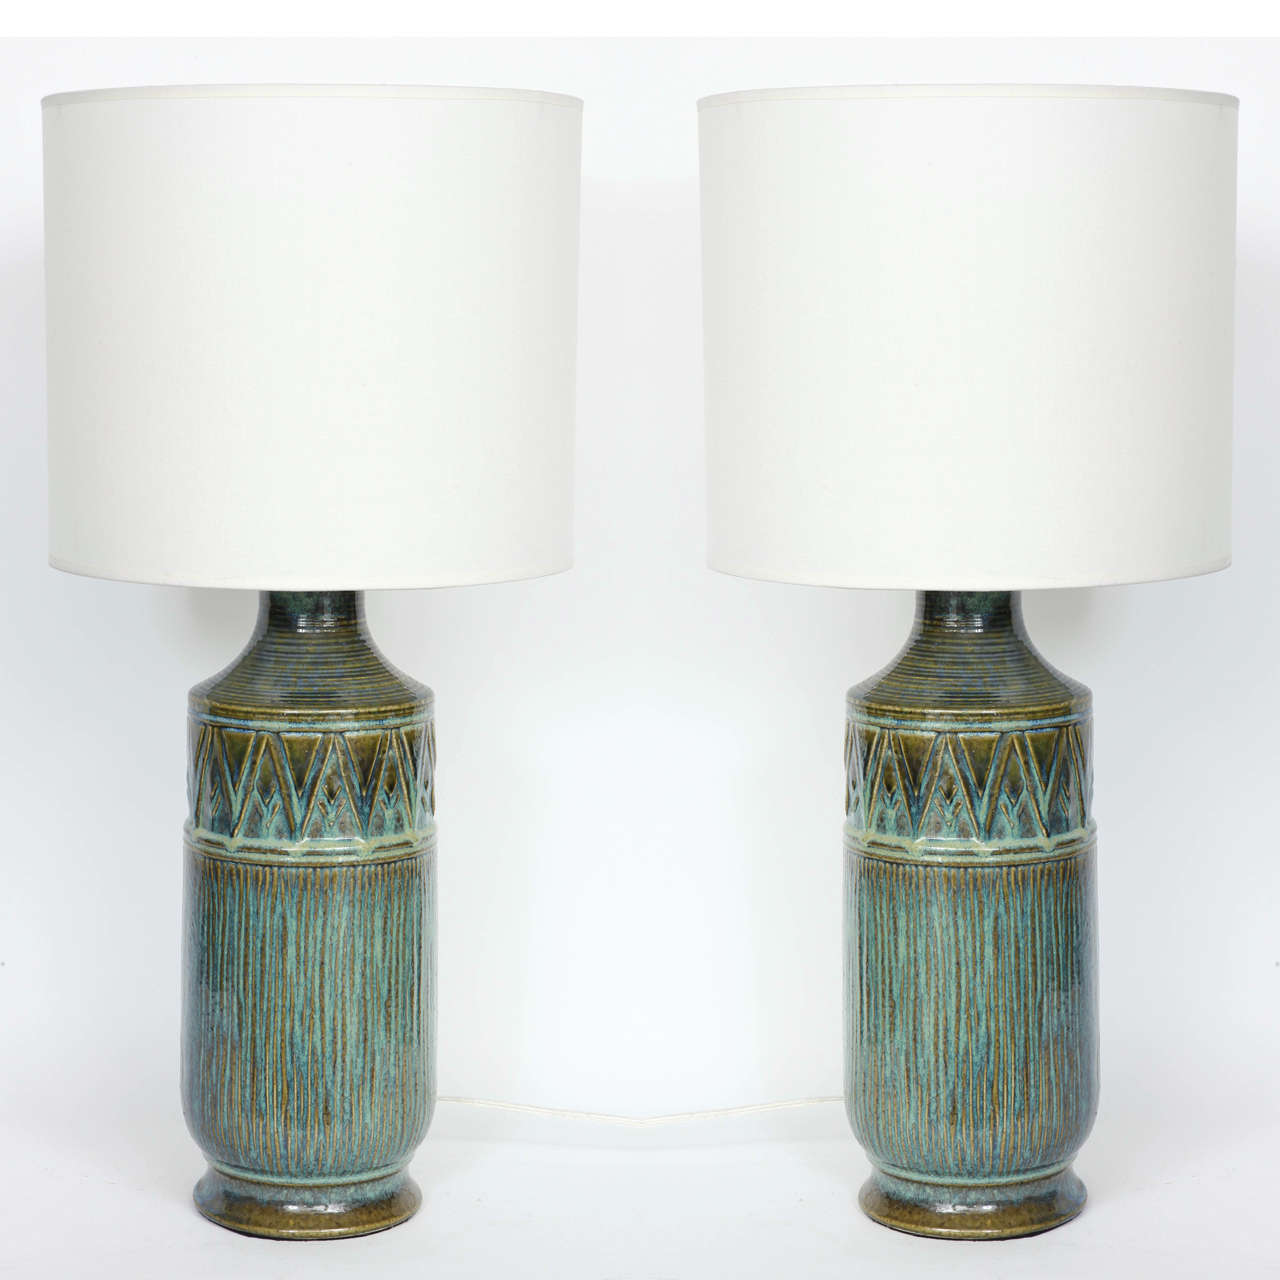 Pair of Danich Modern Mottled blue/green glazed ceramic lamps with a graphic pattern border.